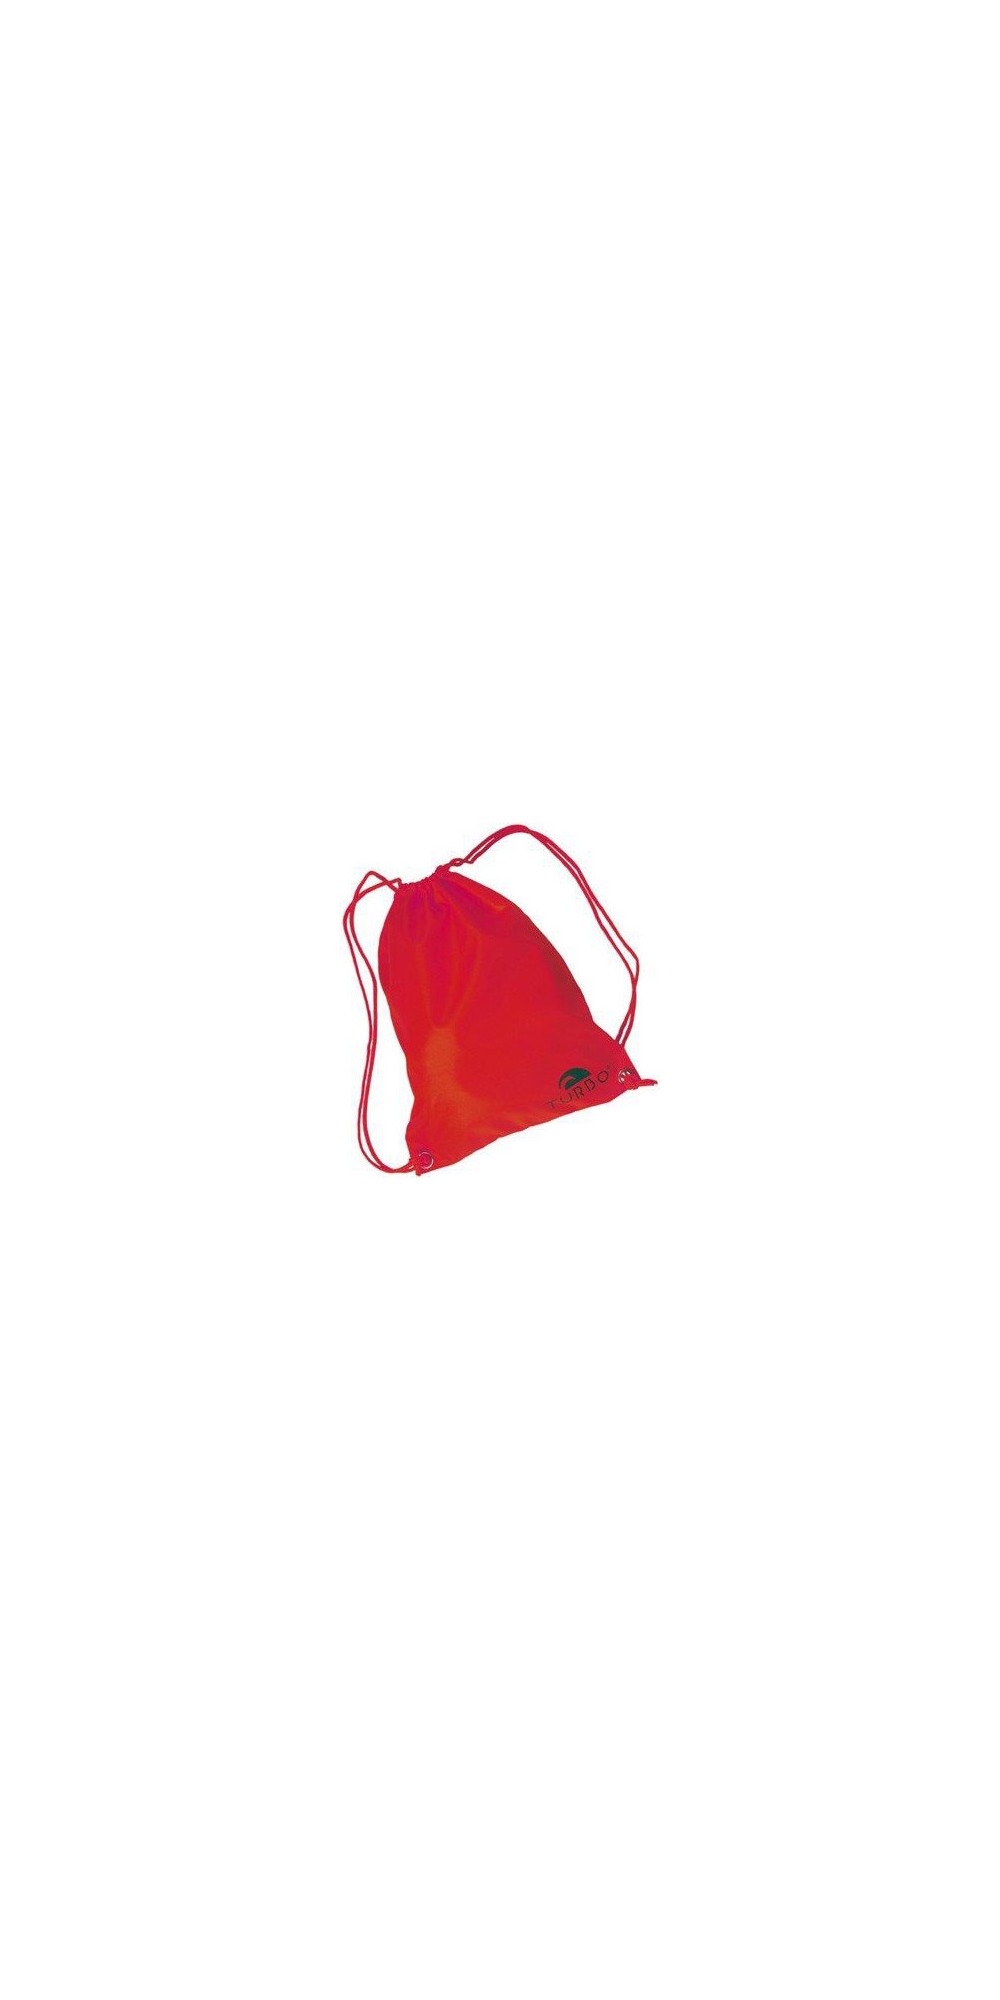 Sac Orion Rouge